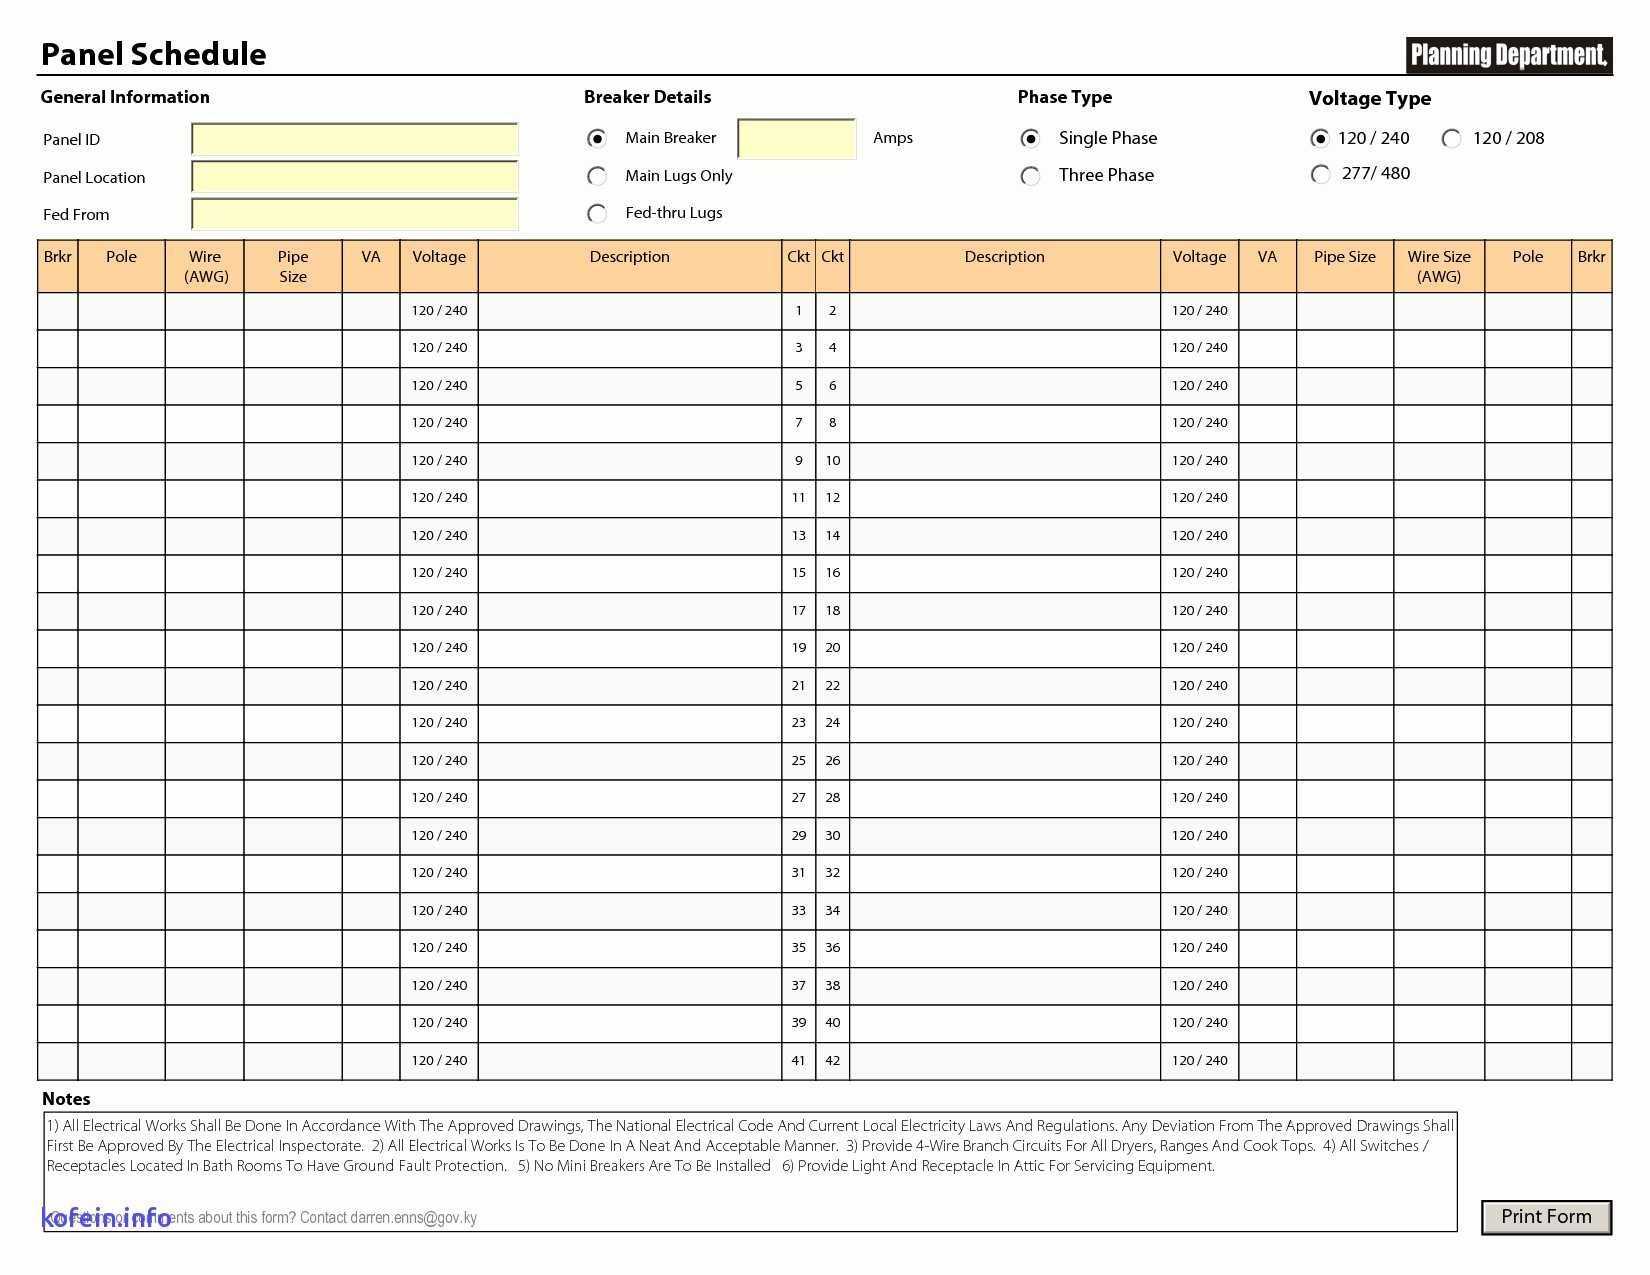 010 Electrical Panel Schedule Template Excel Or Label Intended For Electrical Panel Label Template Download